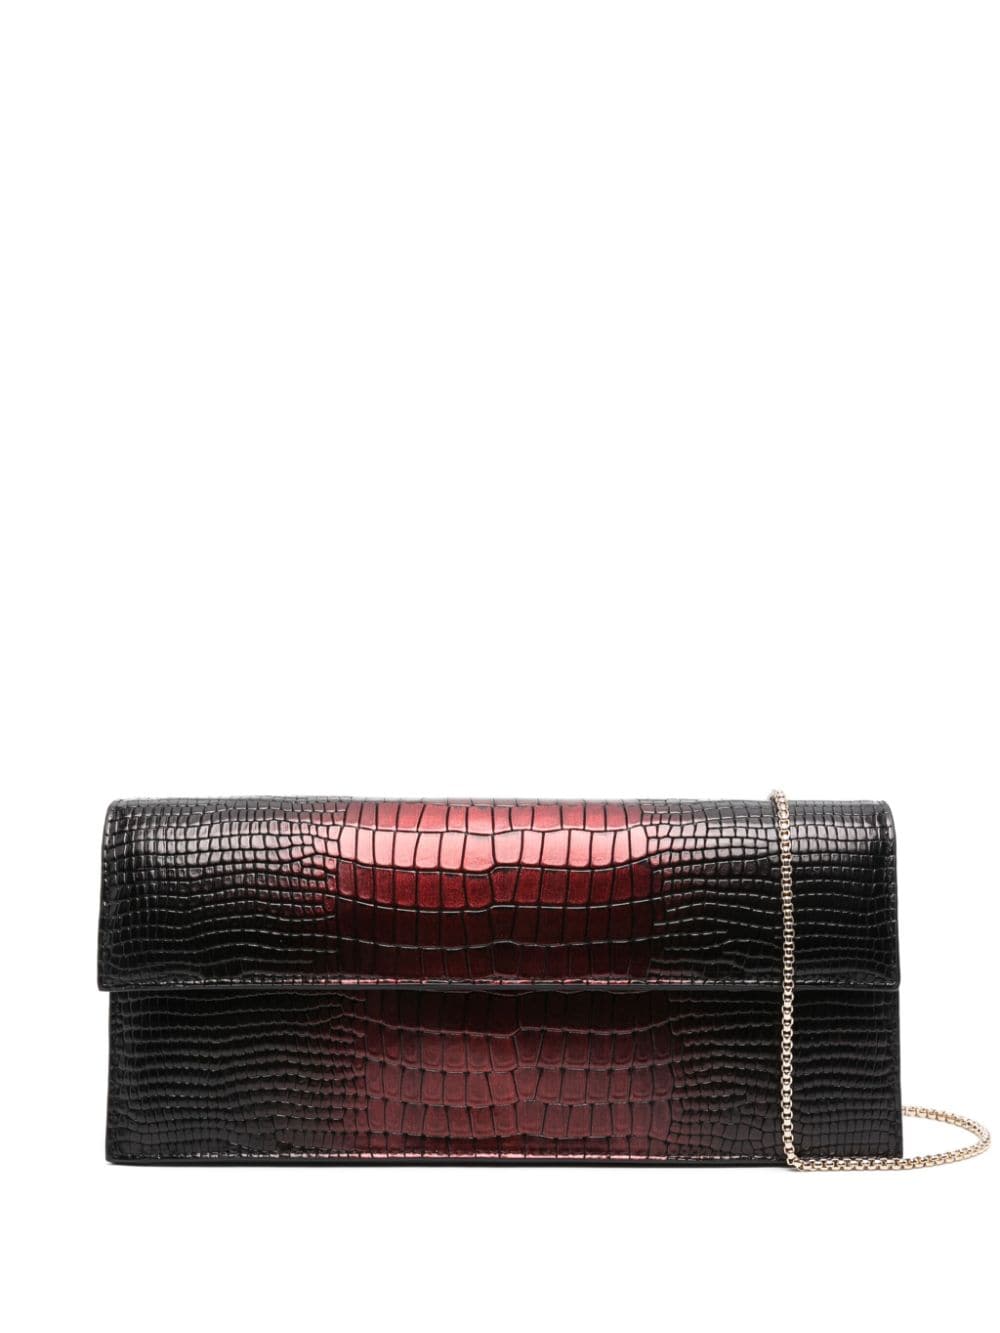 Aspinal Of London Ava embossed crocodile clutch bag - Black von Aspinal Of London